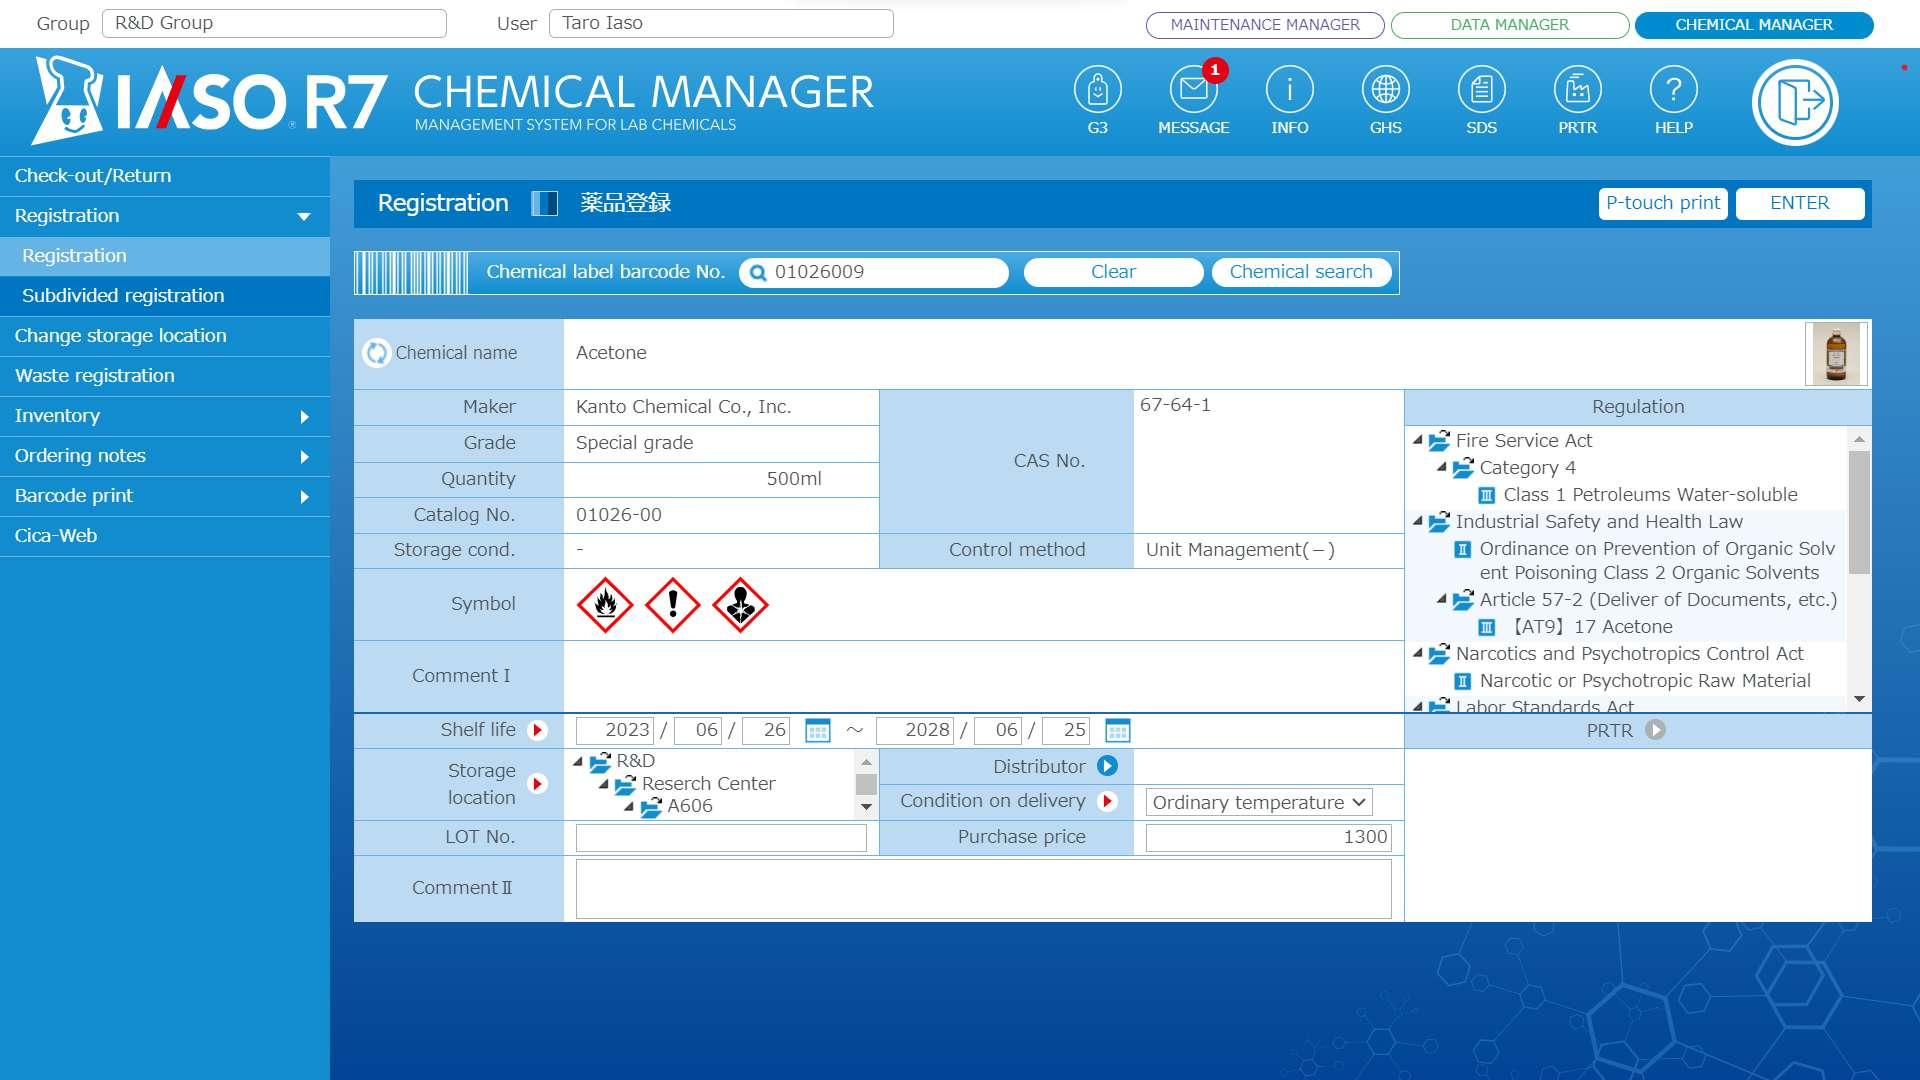 CHEMICAL MANAGER